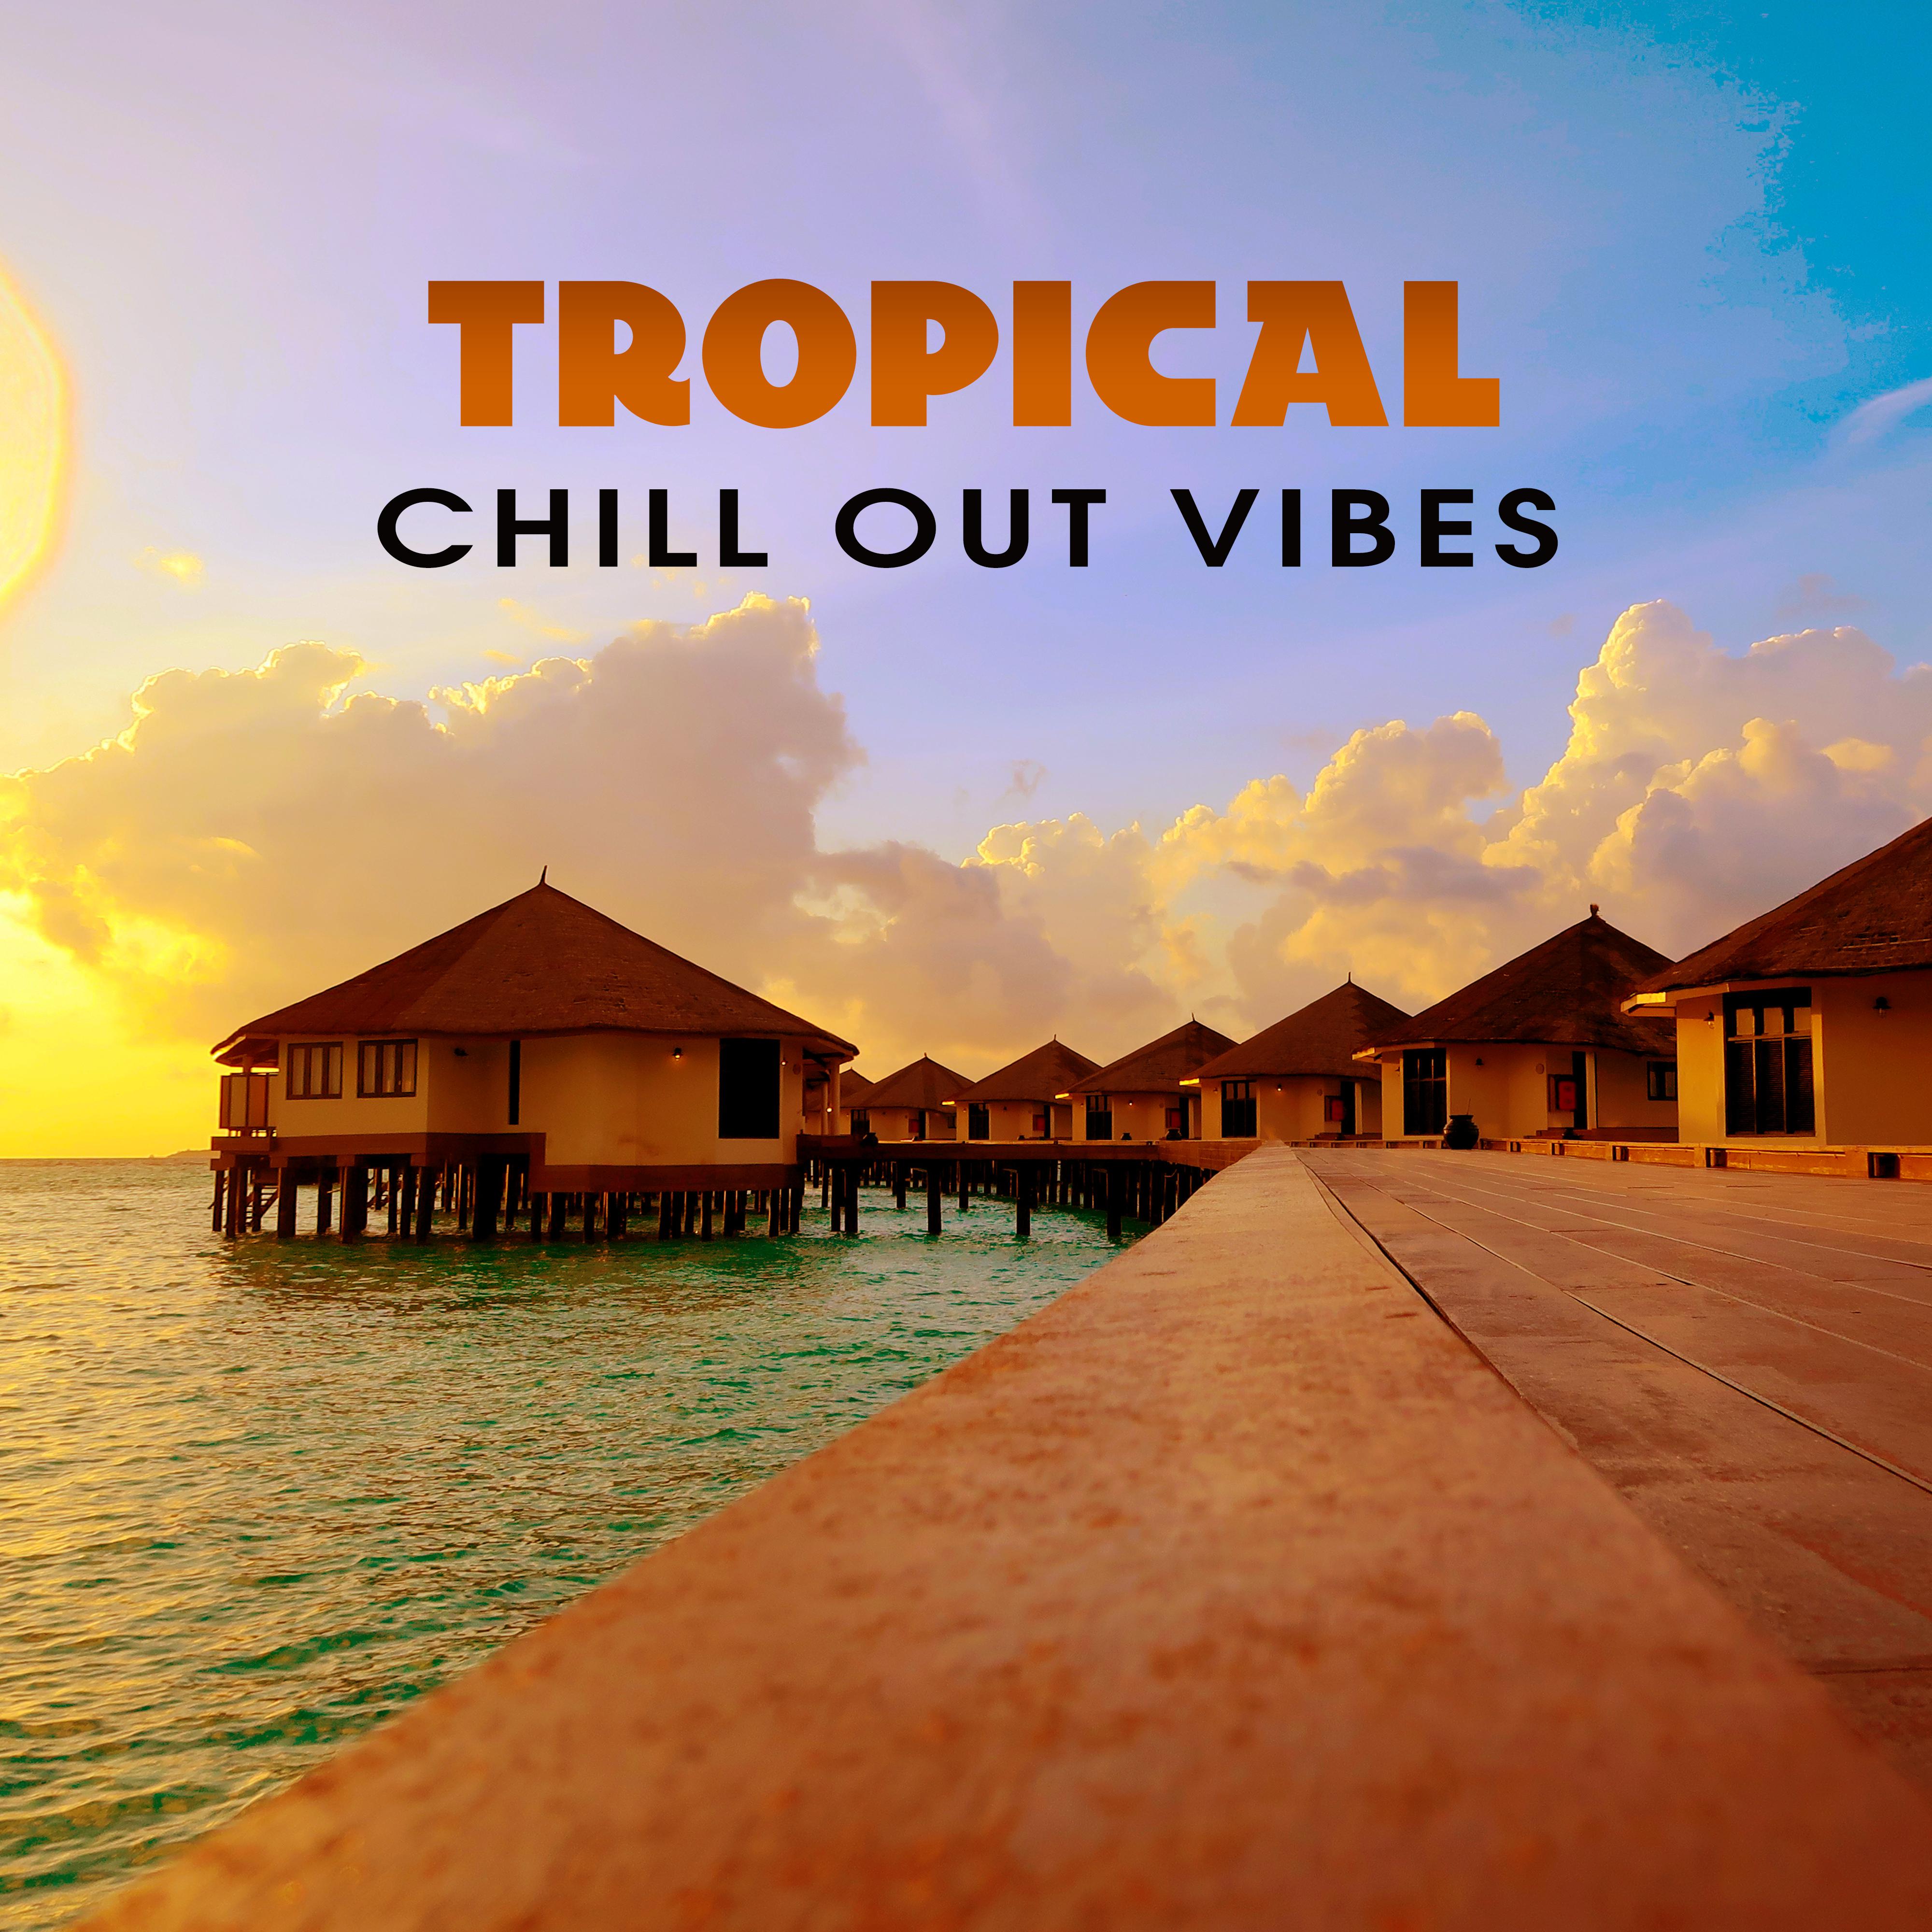 Tropical Chill Out Vibes  Summer Hits, Chill Out 2017, Party Hits, Dance Music, Ibiza Party, Holidays Beats